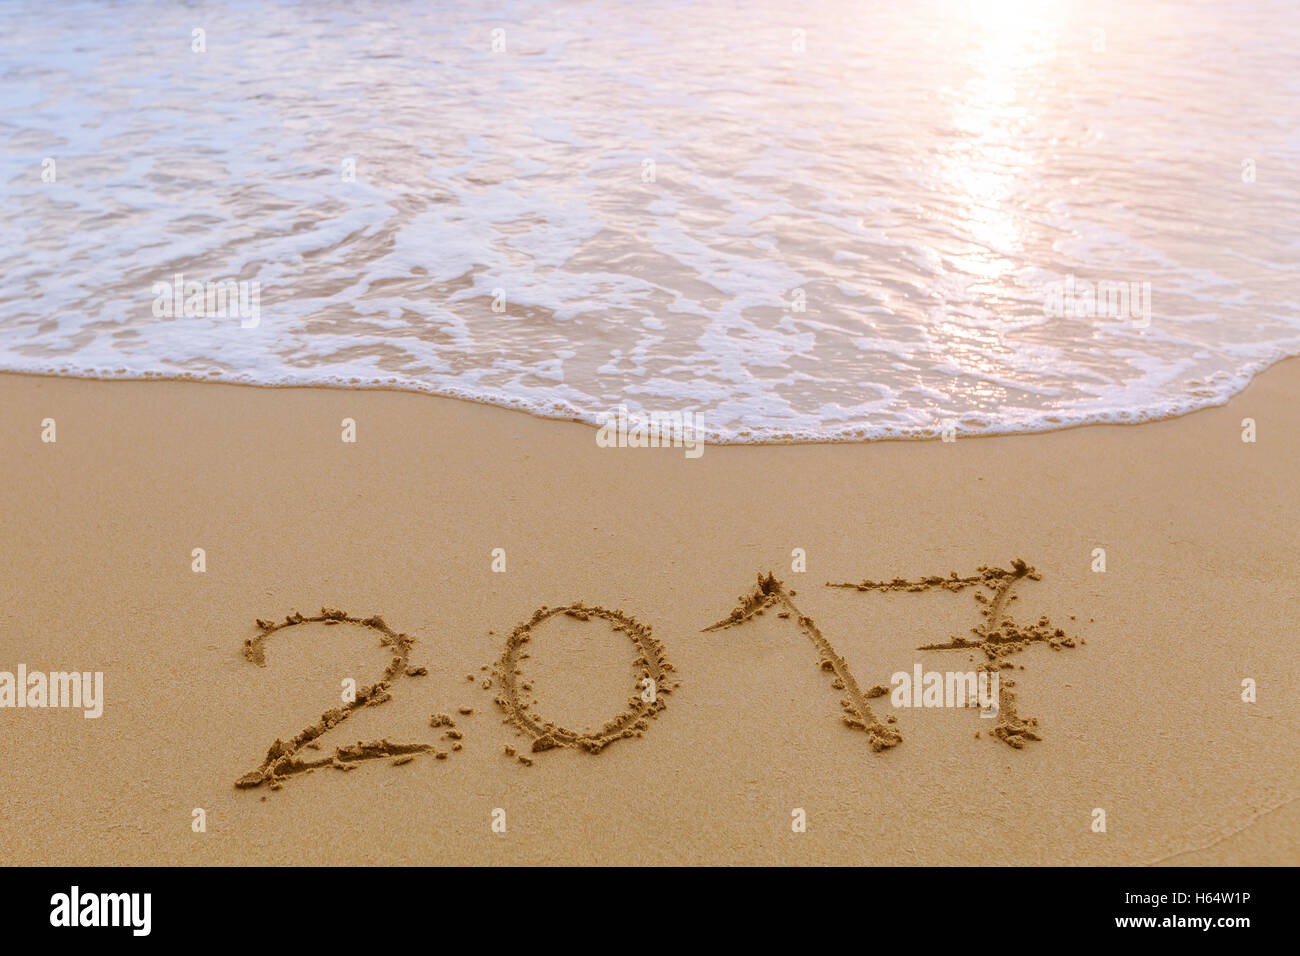 2017 written in the sand of a tropical paradise beach, concept about happy new year greetings Stock Photo